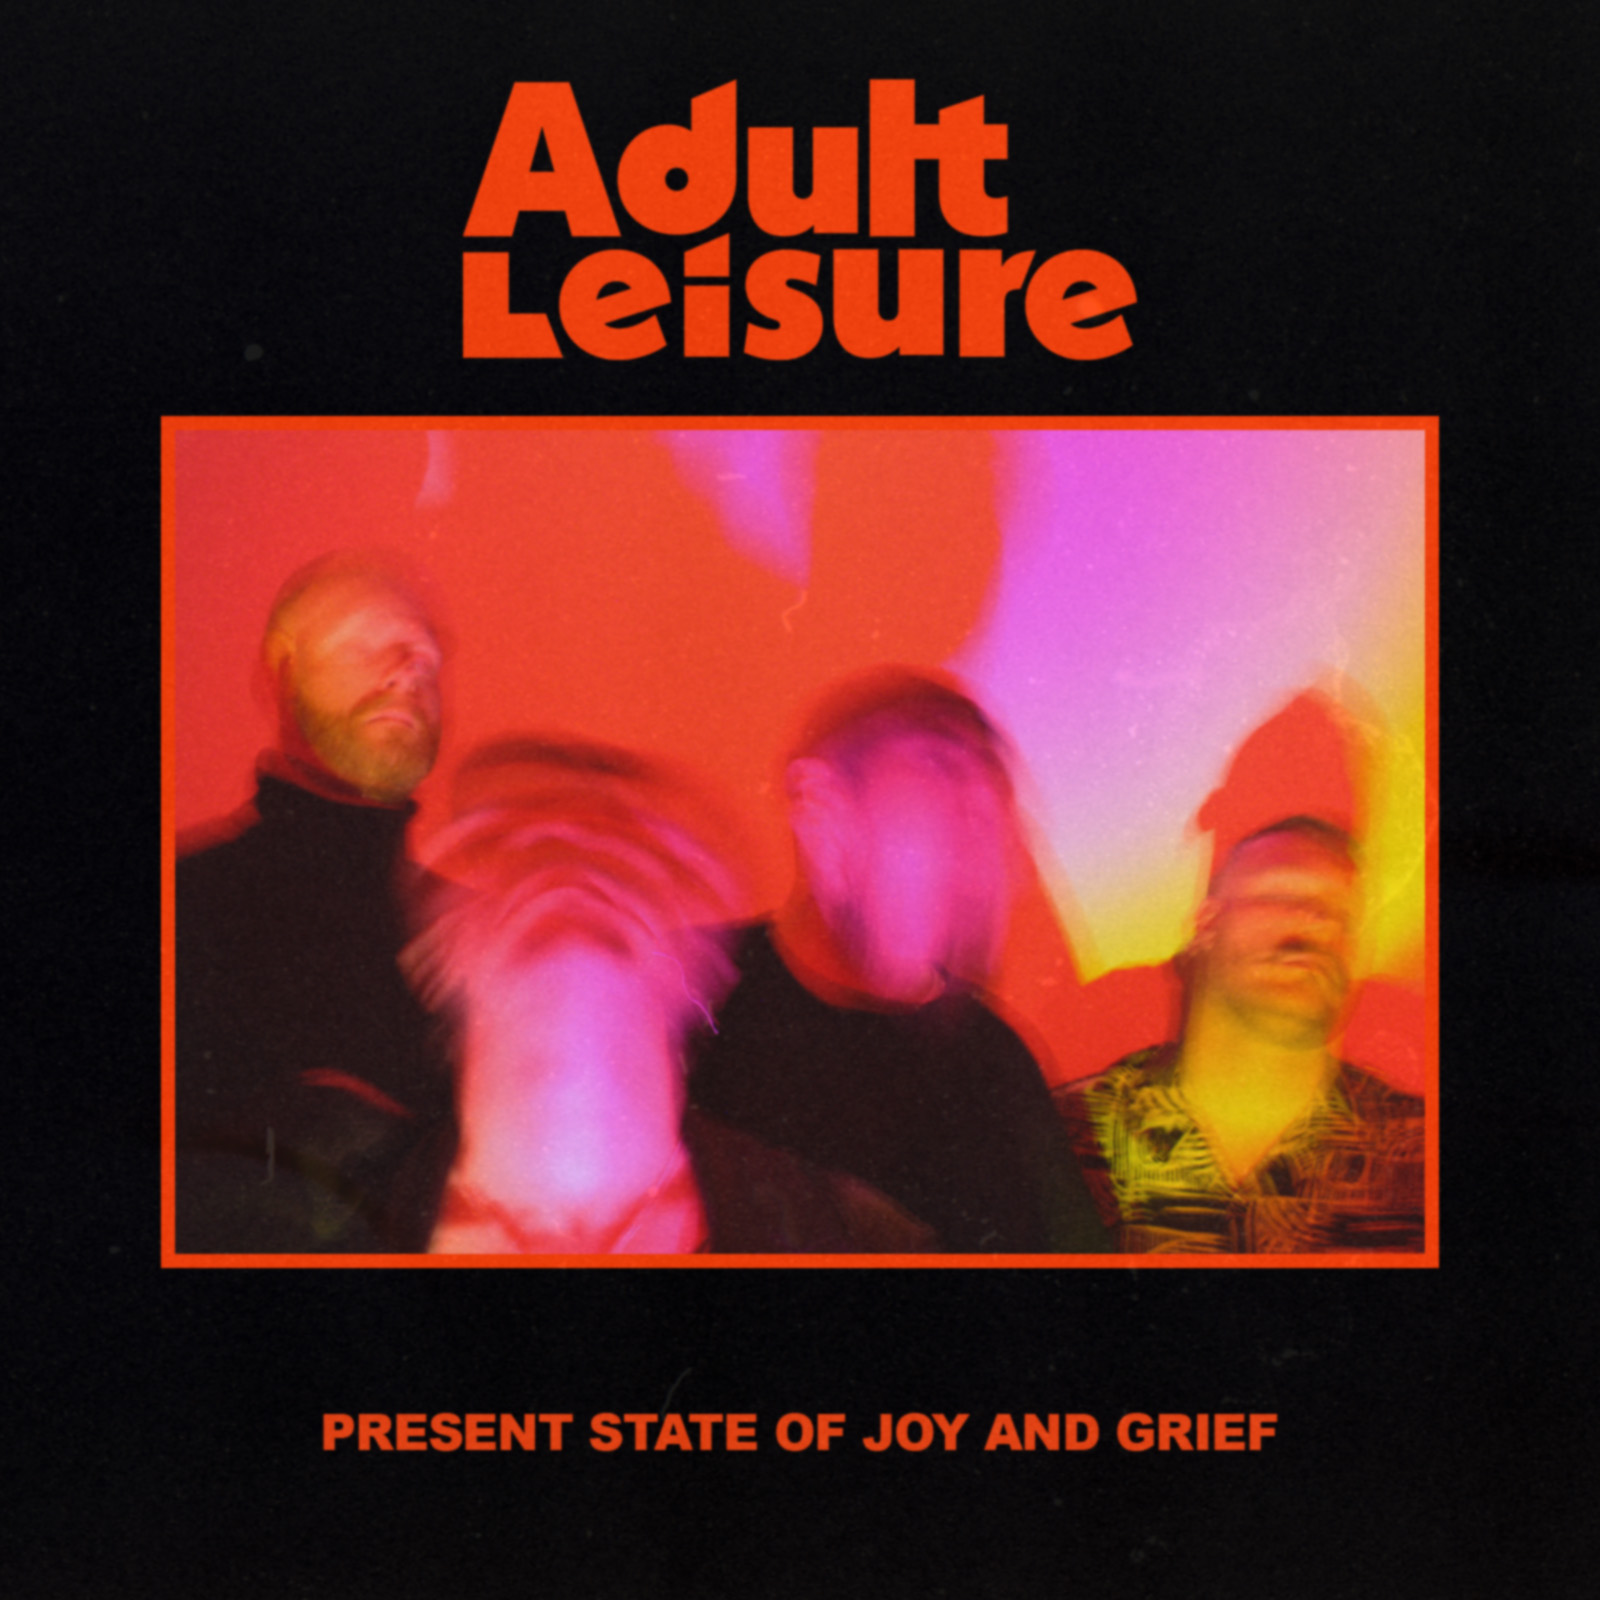 EP REVIEW: Present State of Joy and Grief by Adult Leisure